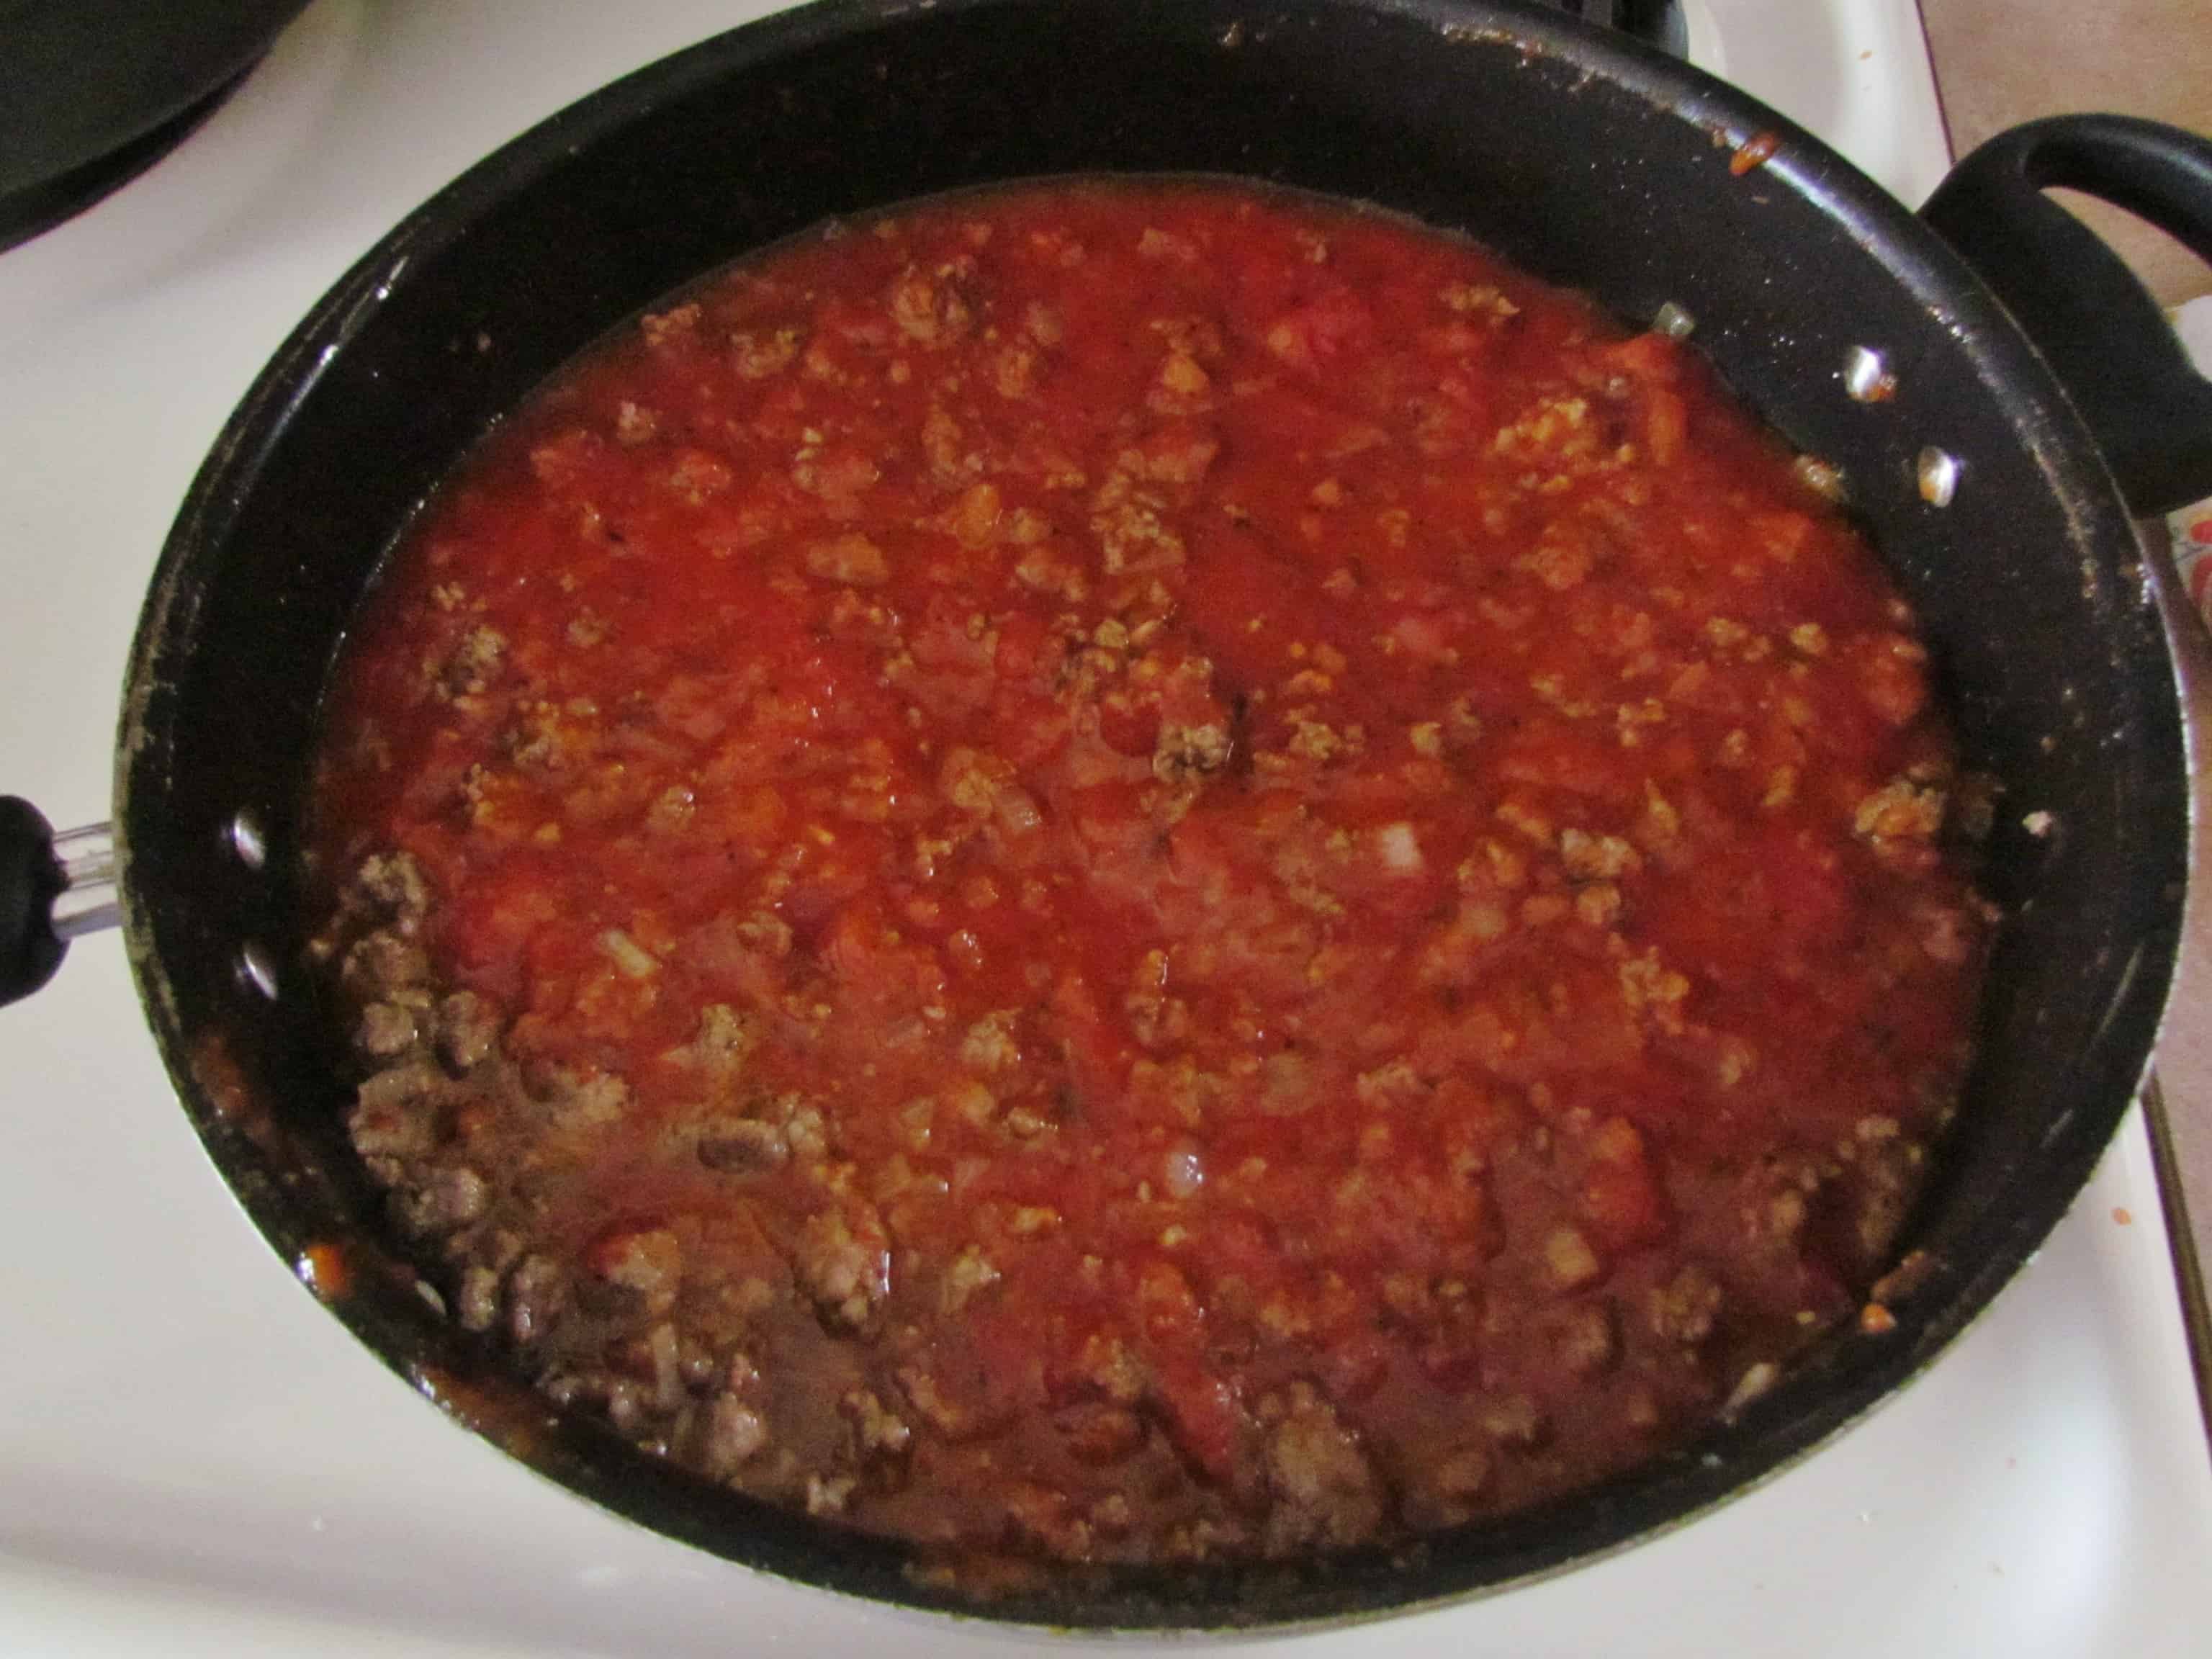 spaghetti sauce and water added to cooked ground beef in a large pan.